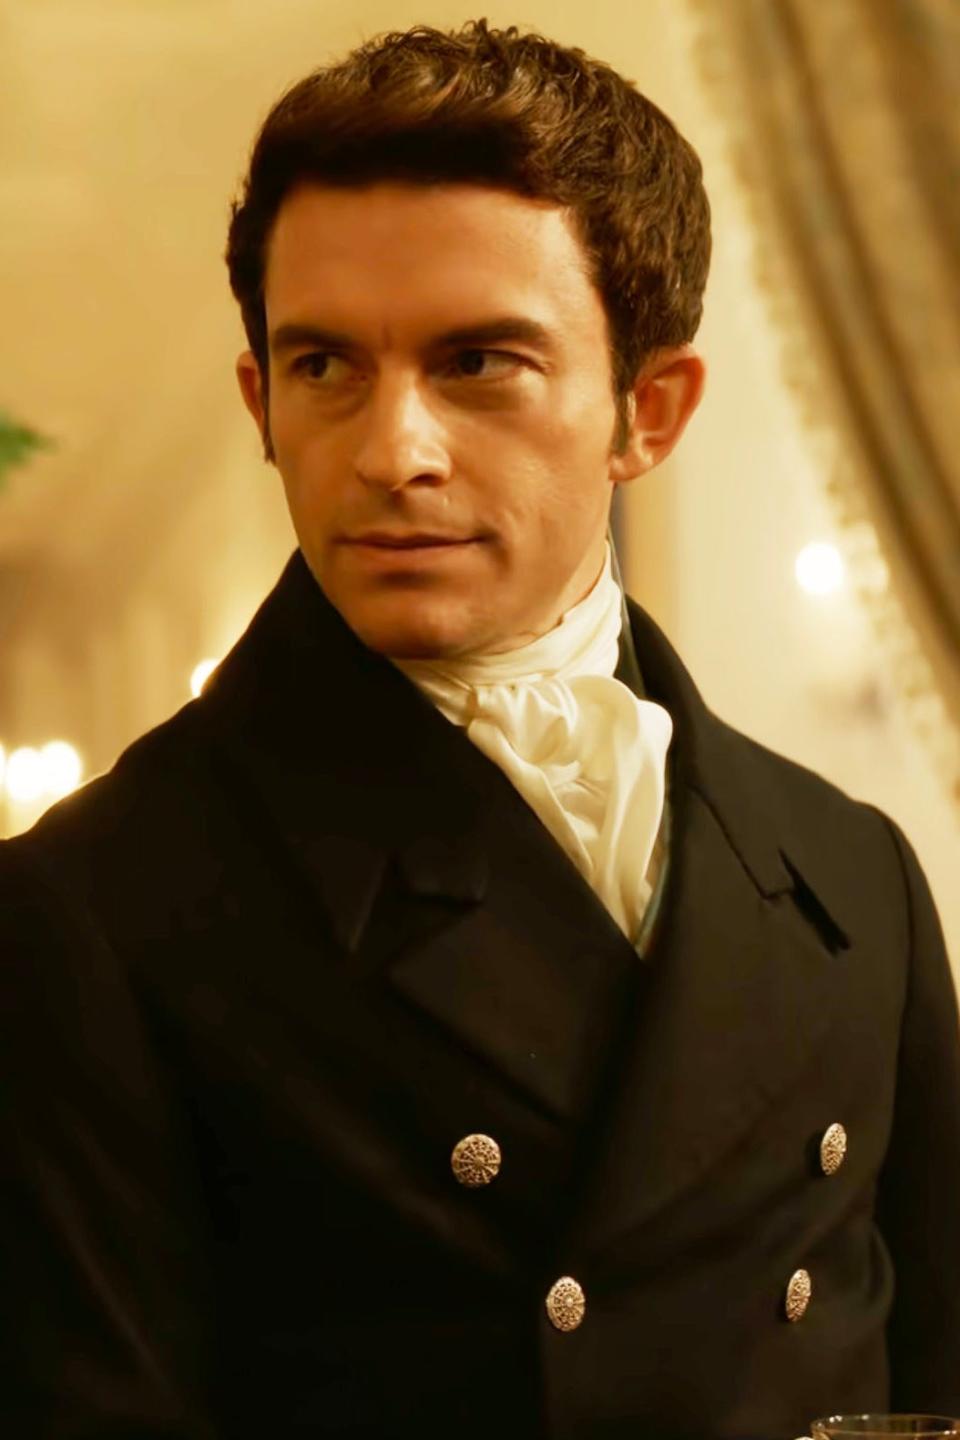 Jonathan Bailey as Anthony Bridgerton, wearing a dark-tailored suit with a cravat